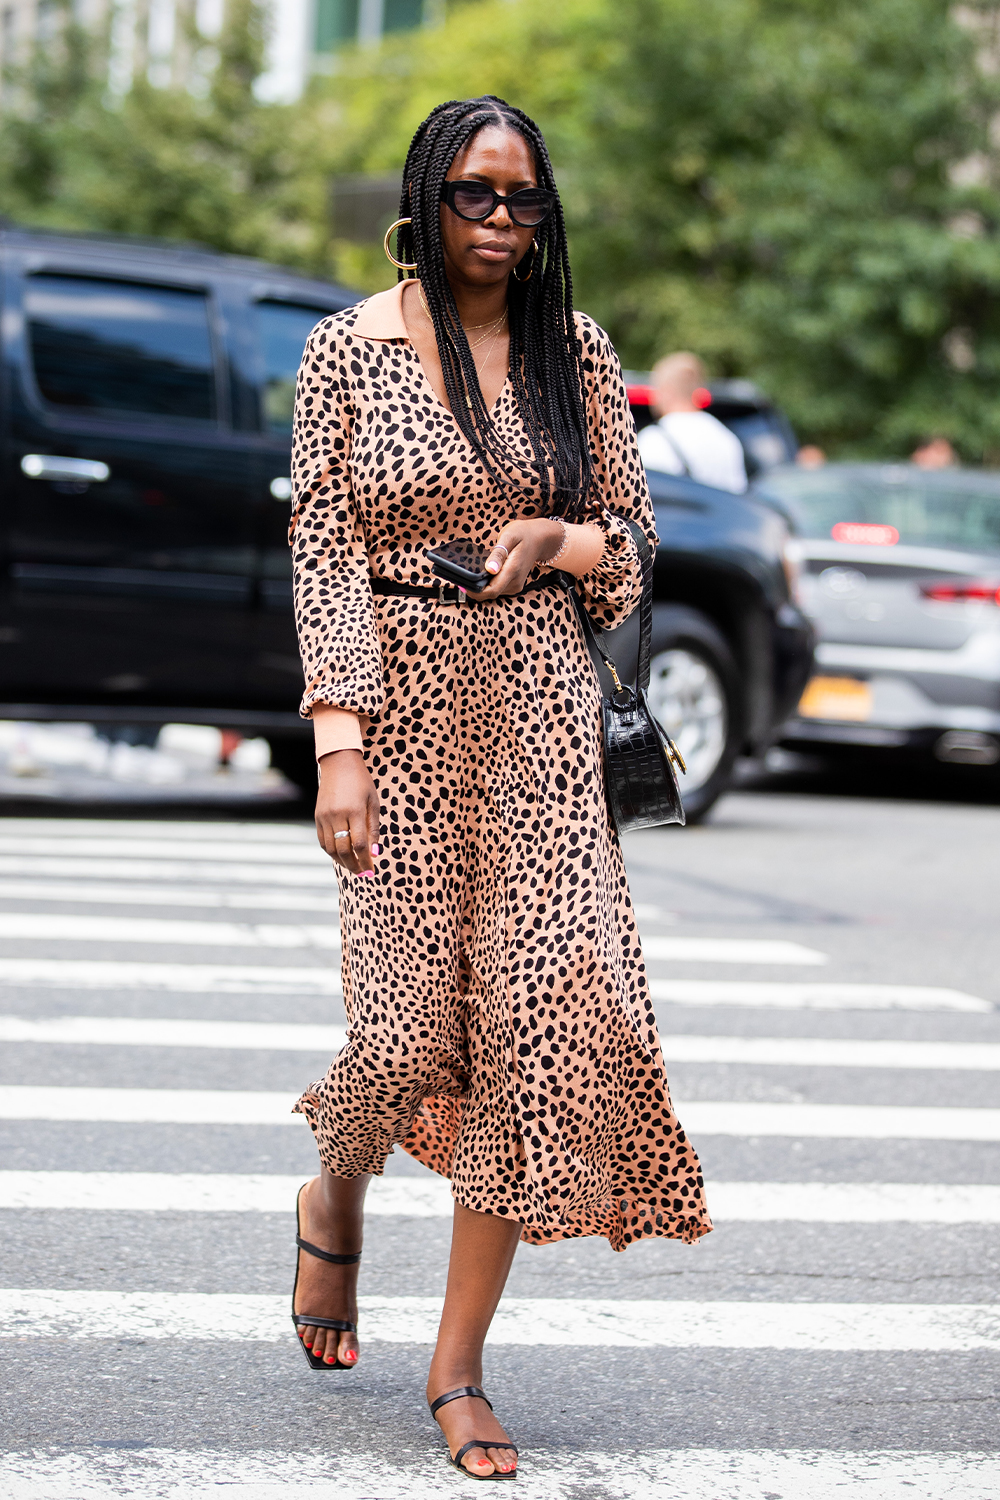 Wild things: Roar into autumn with leopard print | Fashion | The Guardian